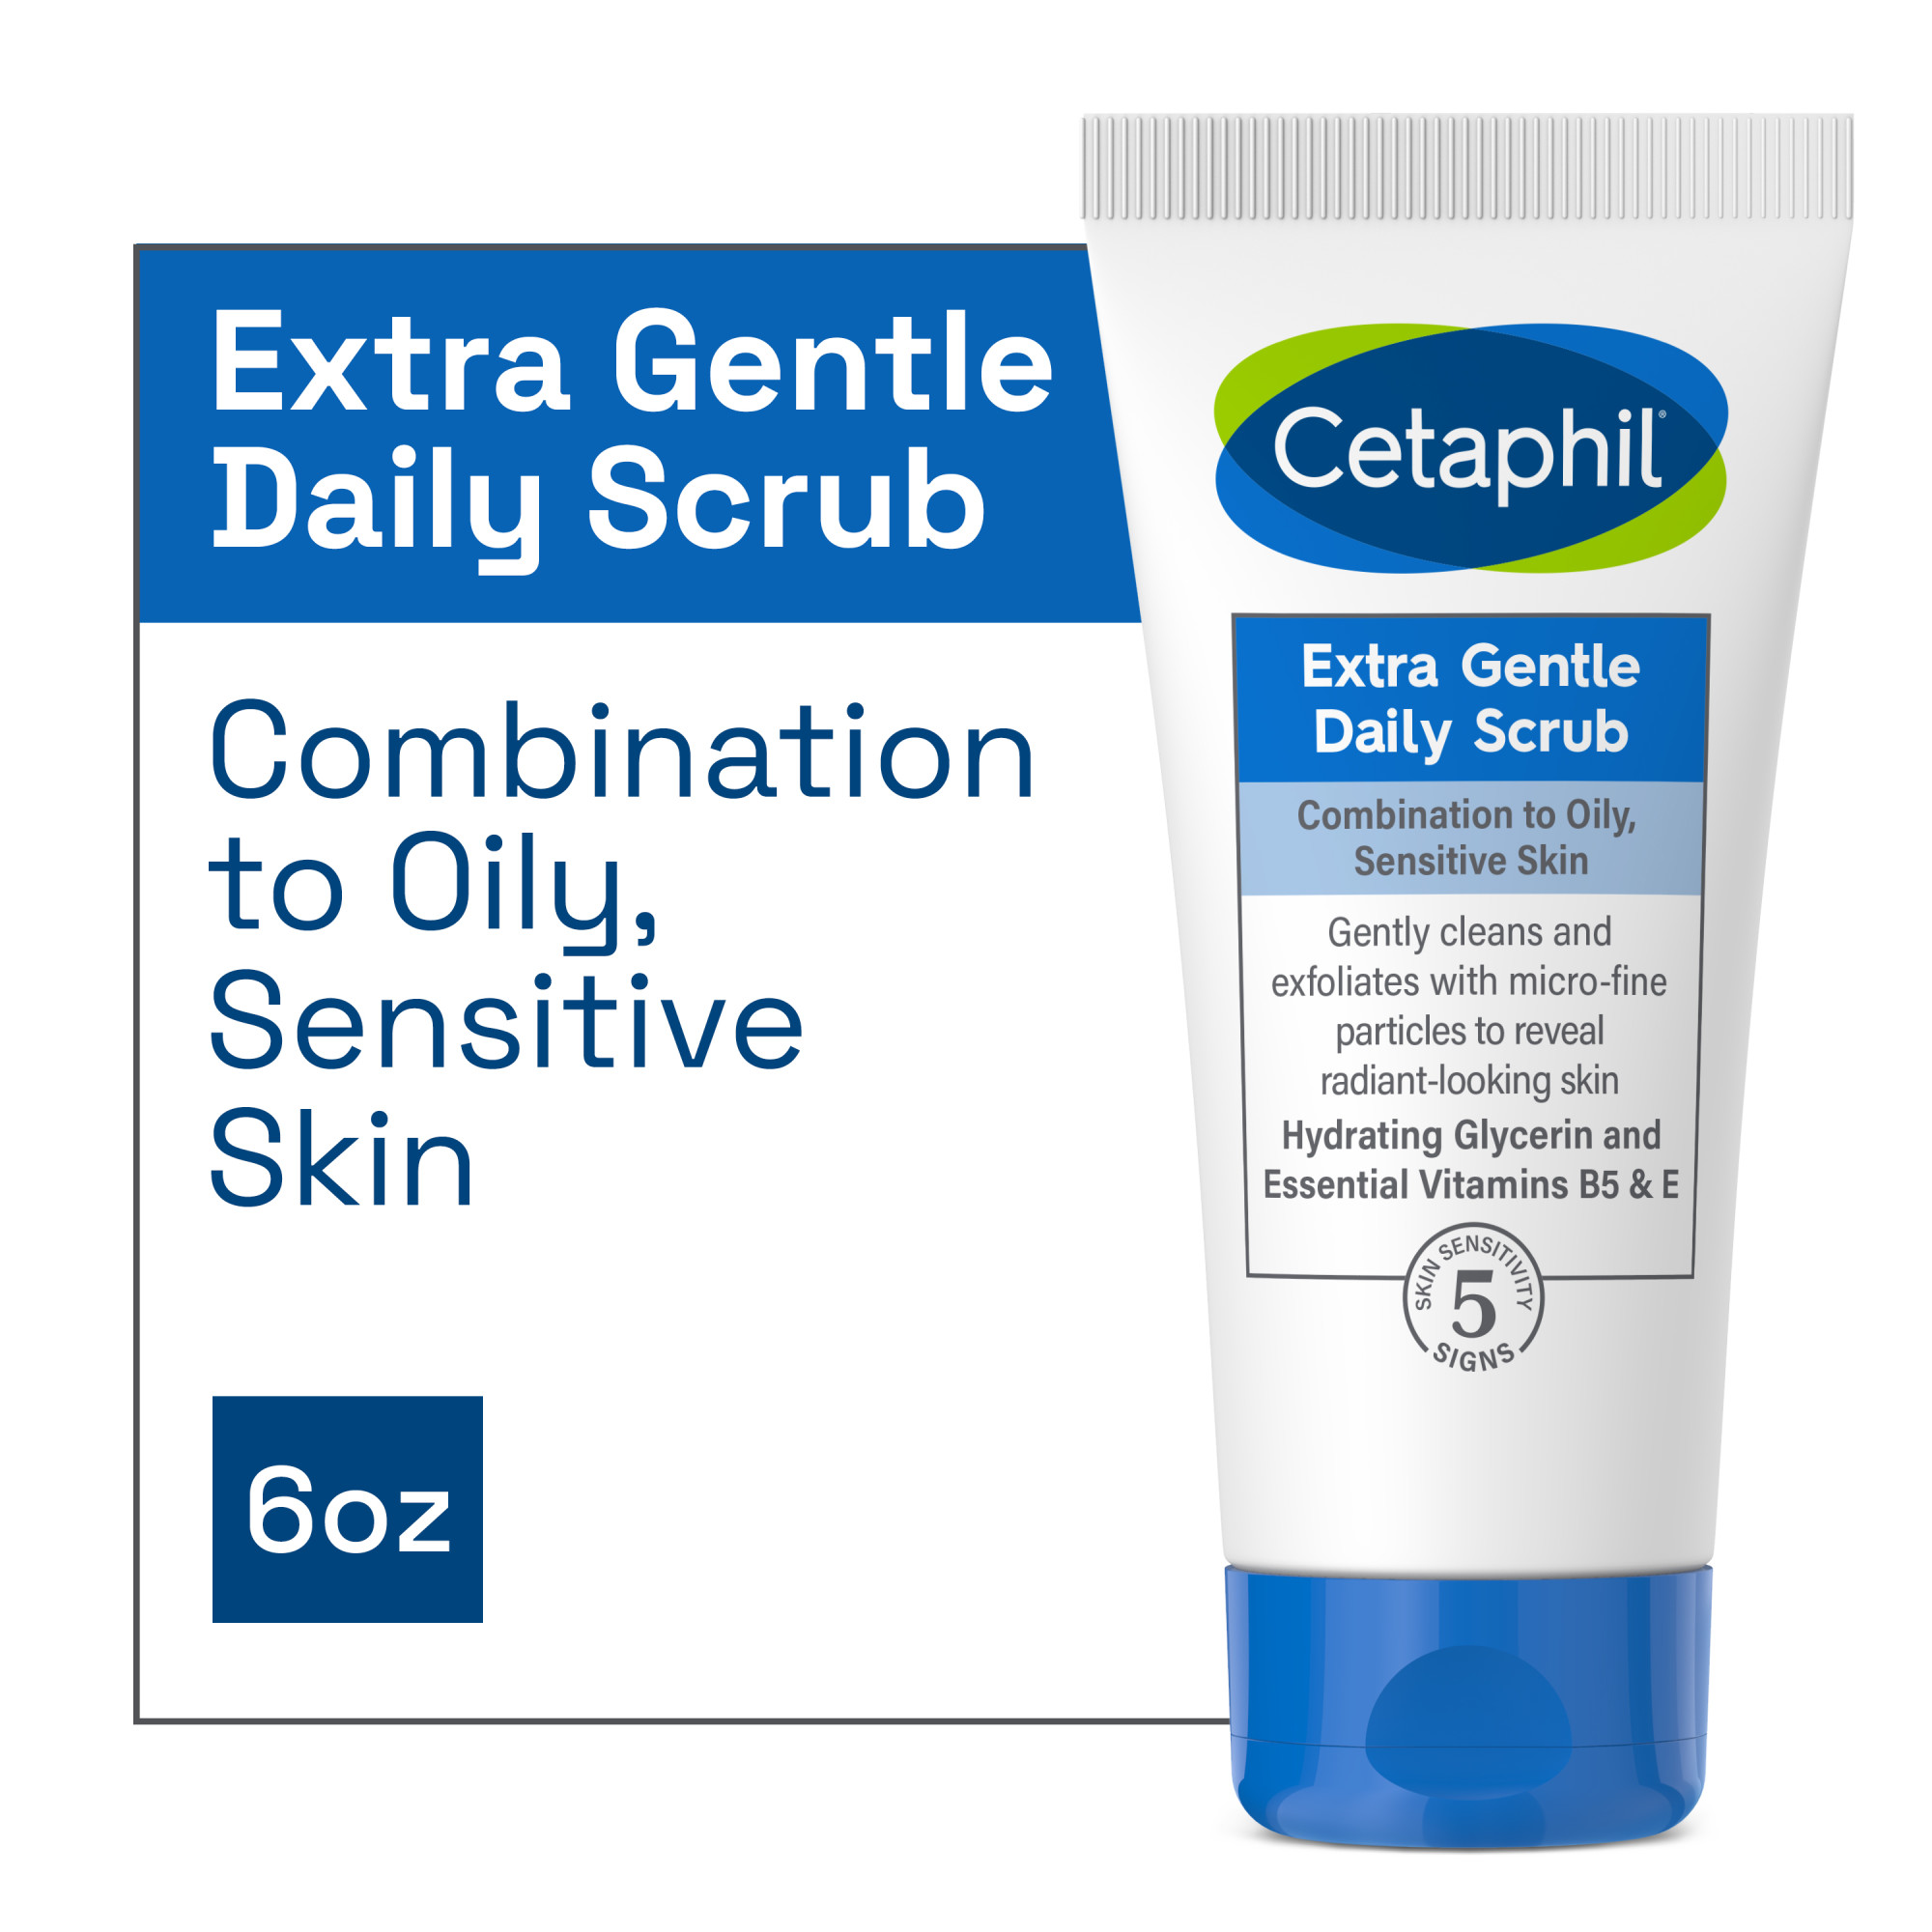 Cetaphil Extra Gentle Daily Scrub, Exfoliating Face Wash For All Skin Types, 6 oz - image 1 of 10